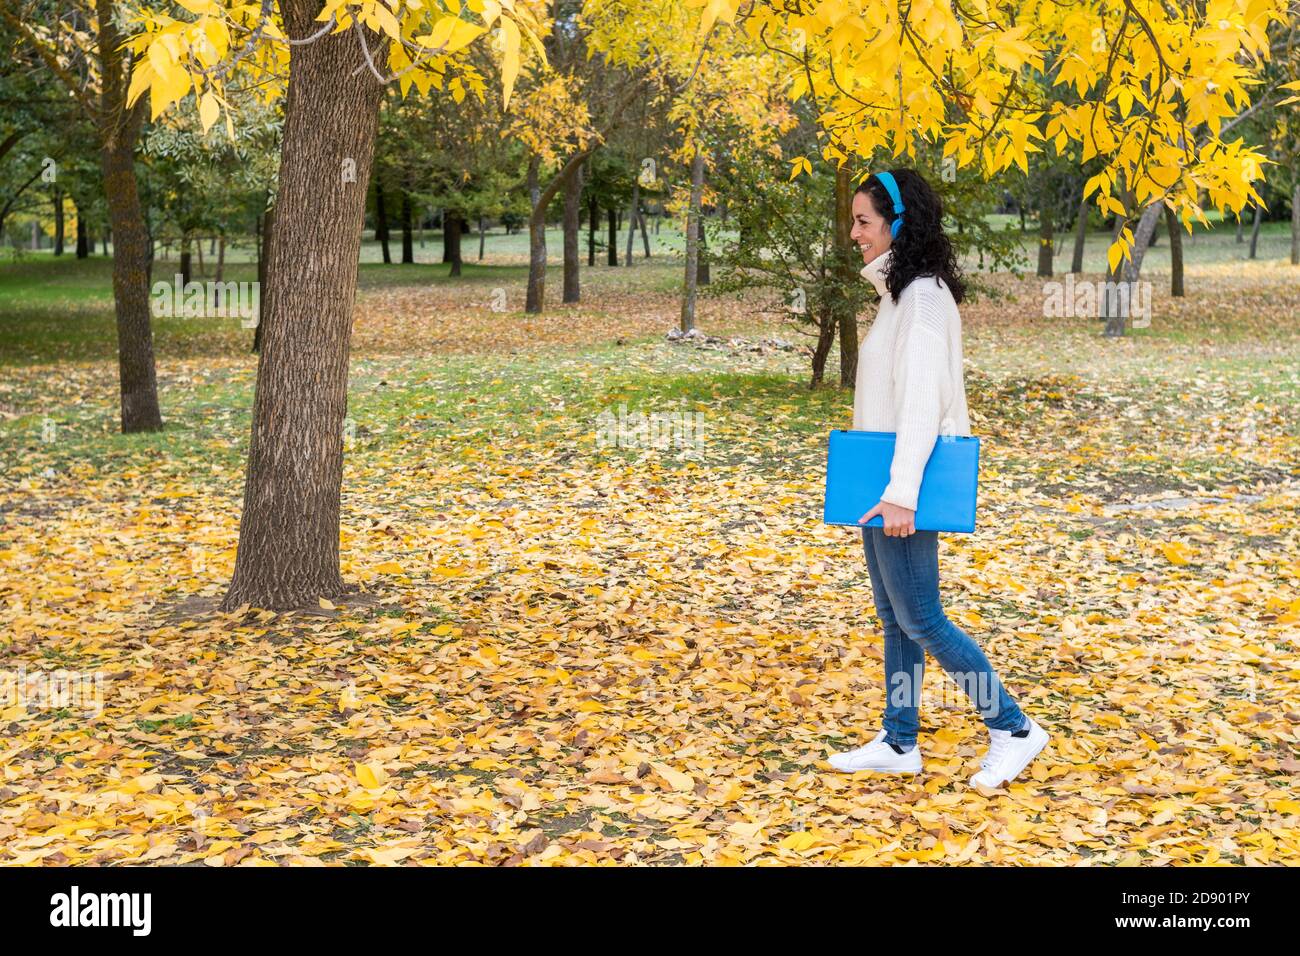 young woman with curly black hair wears blue wireless headphones and in hand her laptop to work outdoors. park in autumn with dry leaves fallen from t Stock Photo